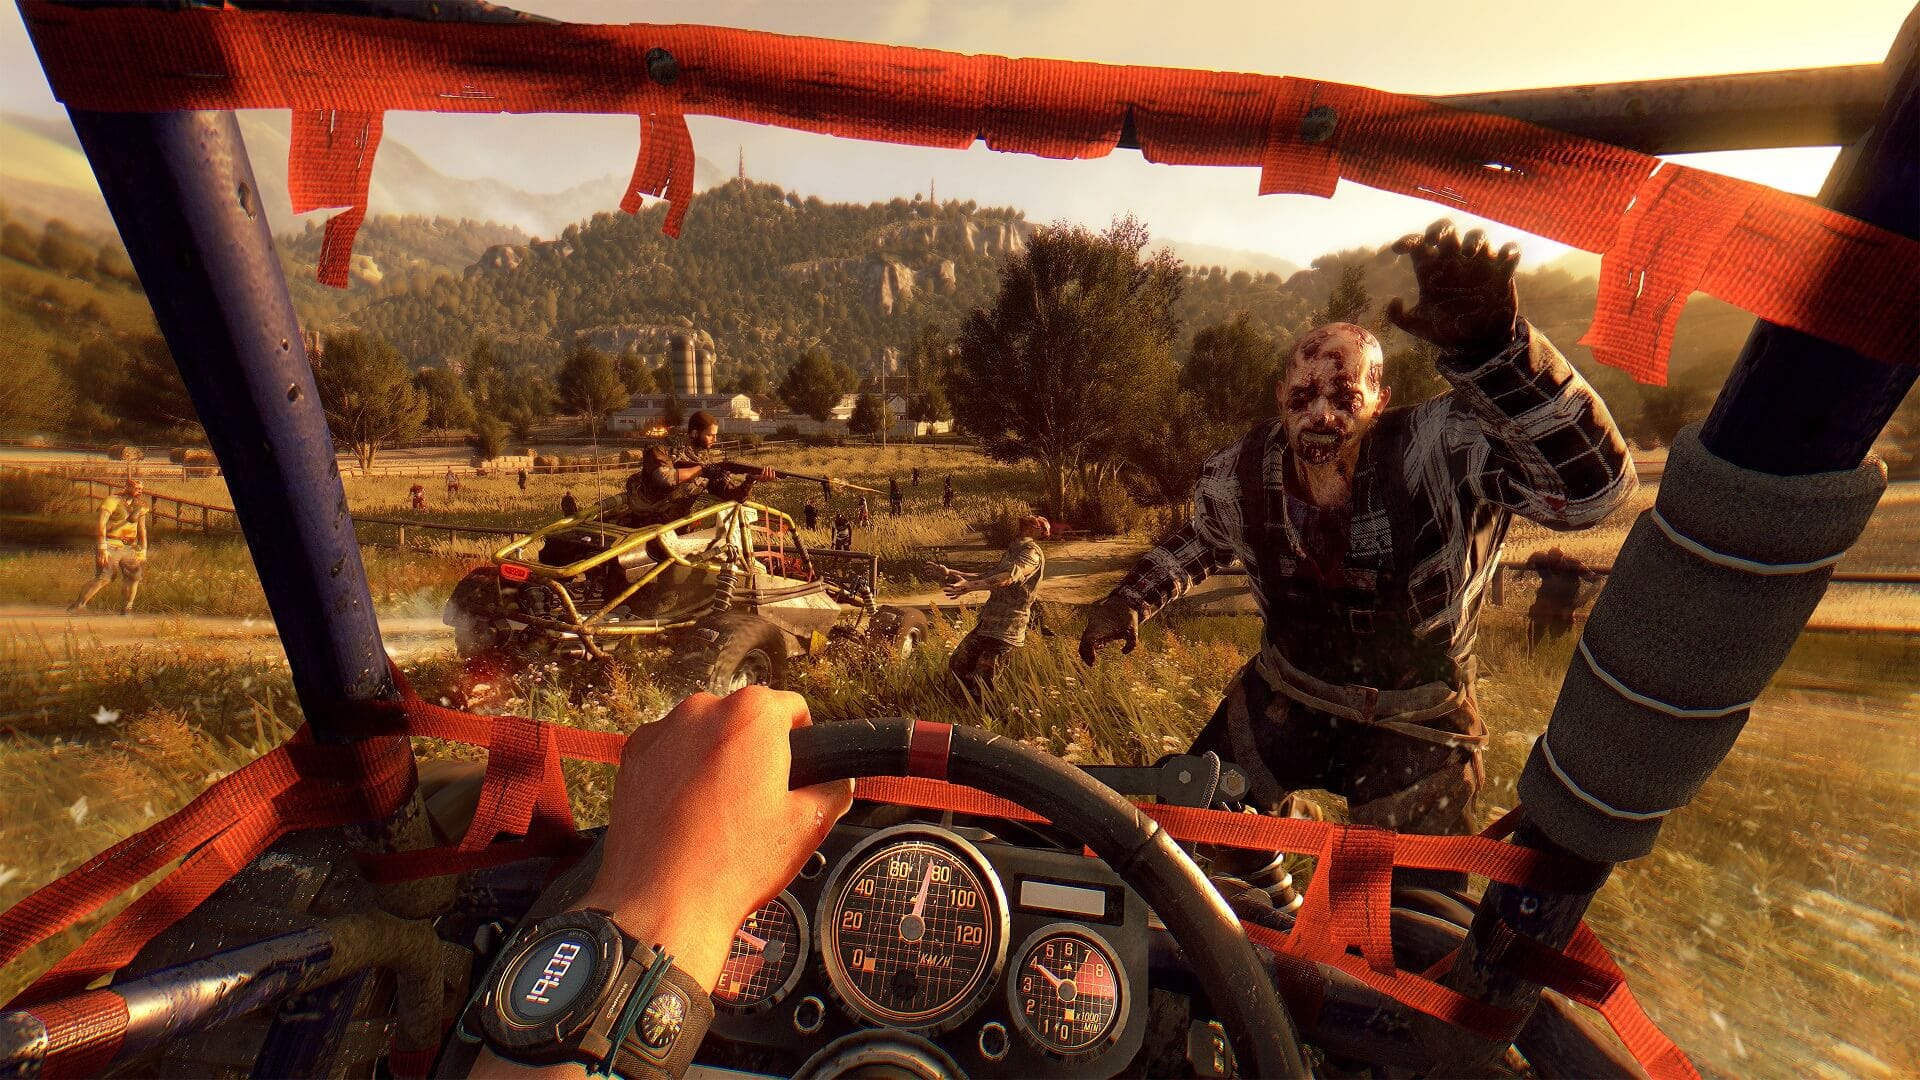 Wedge indstudering tyve Major Dying Light DLC Free For All Owners | TechRaptor